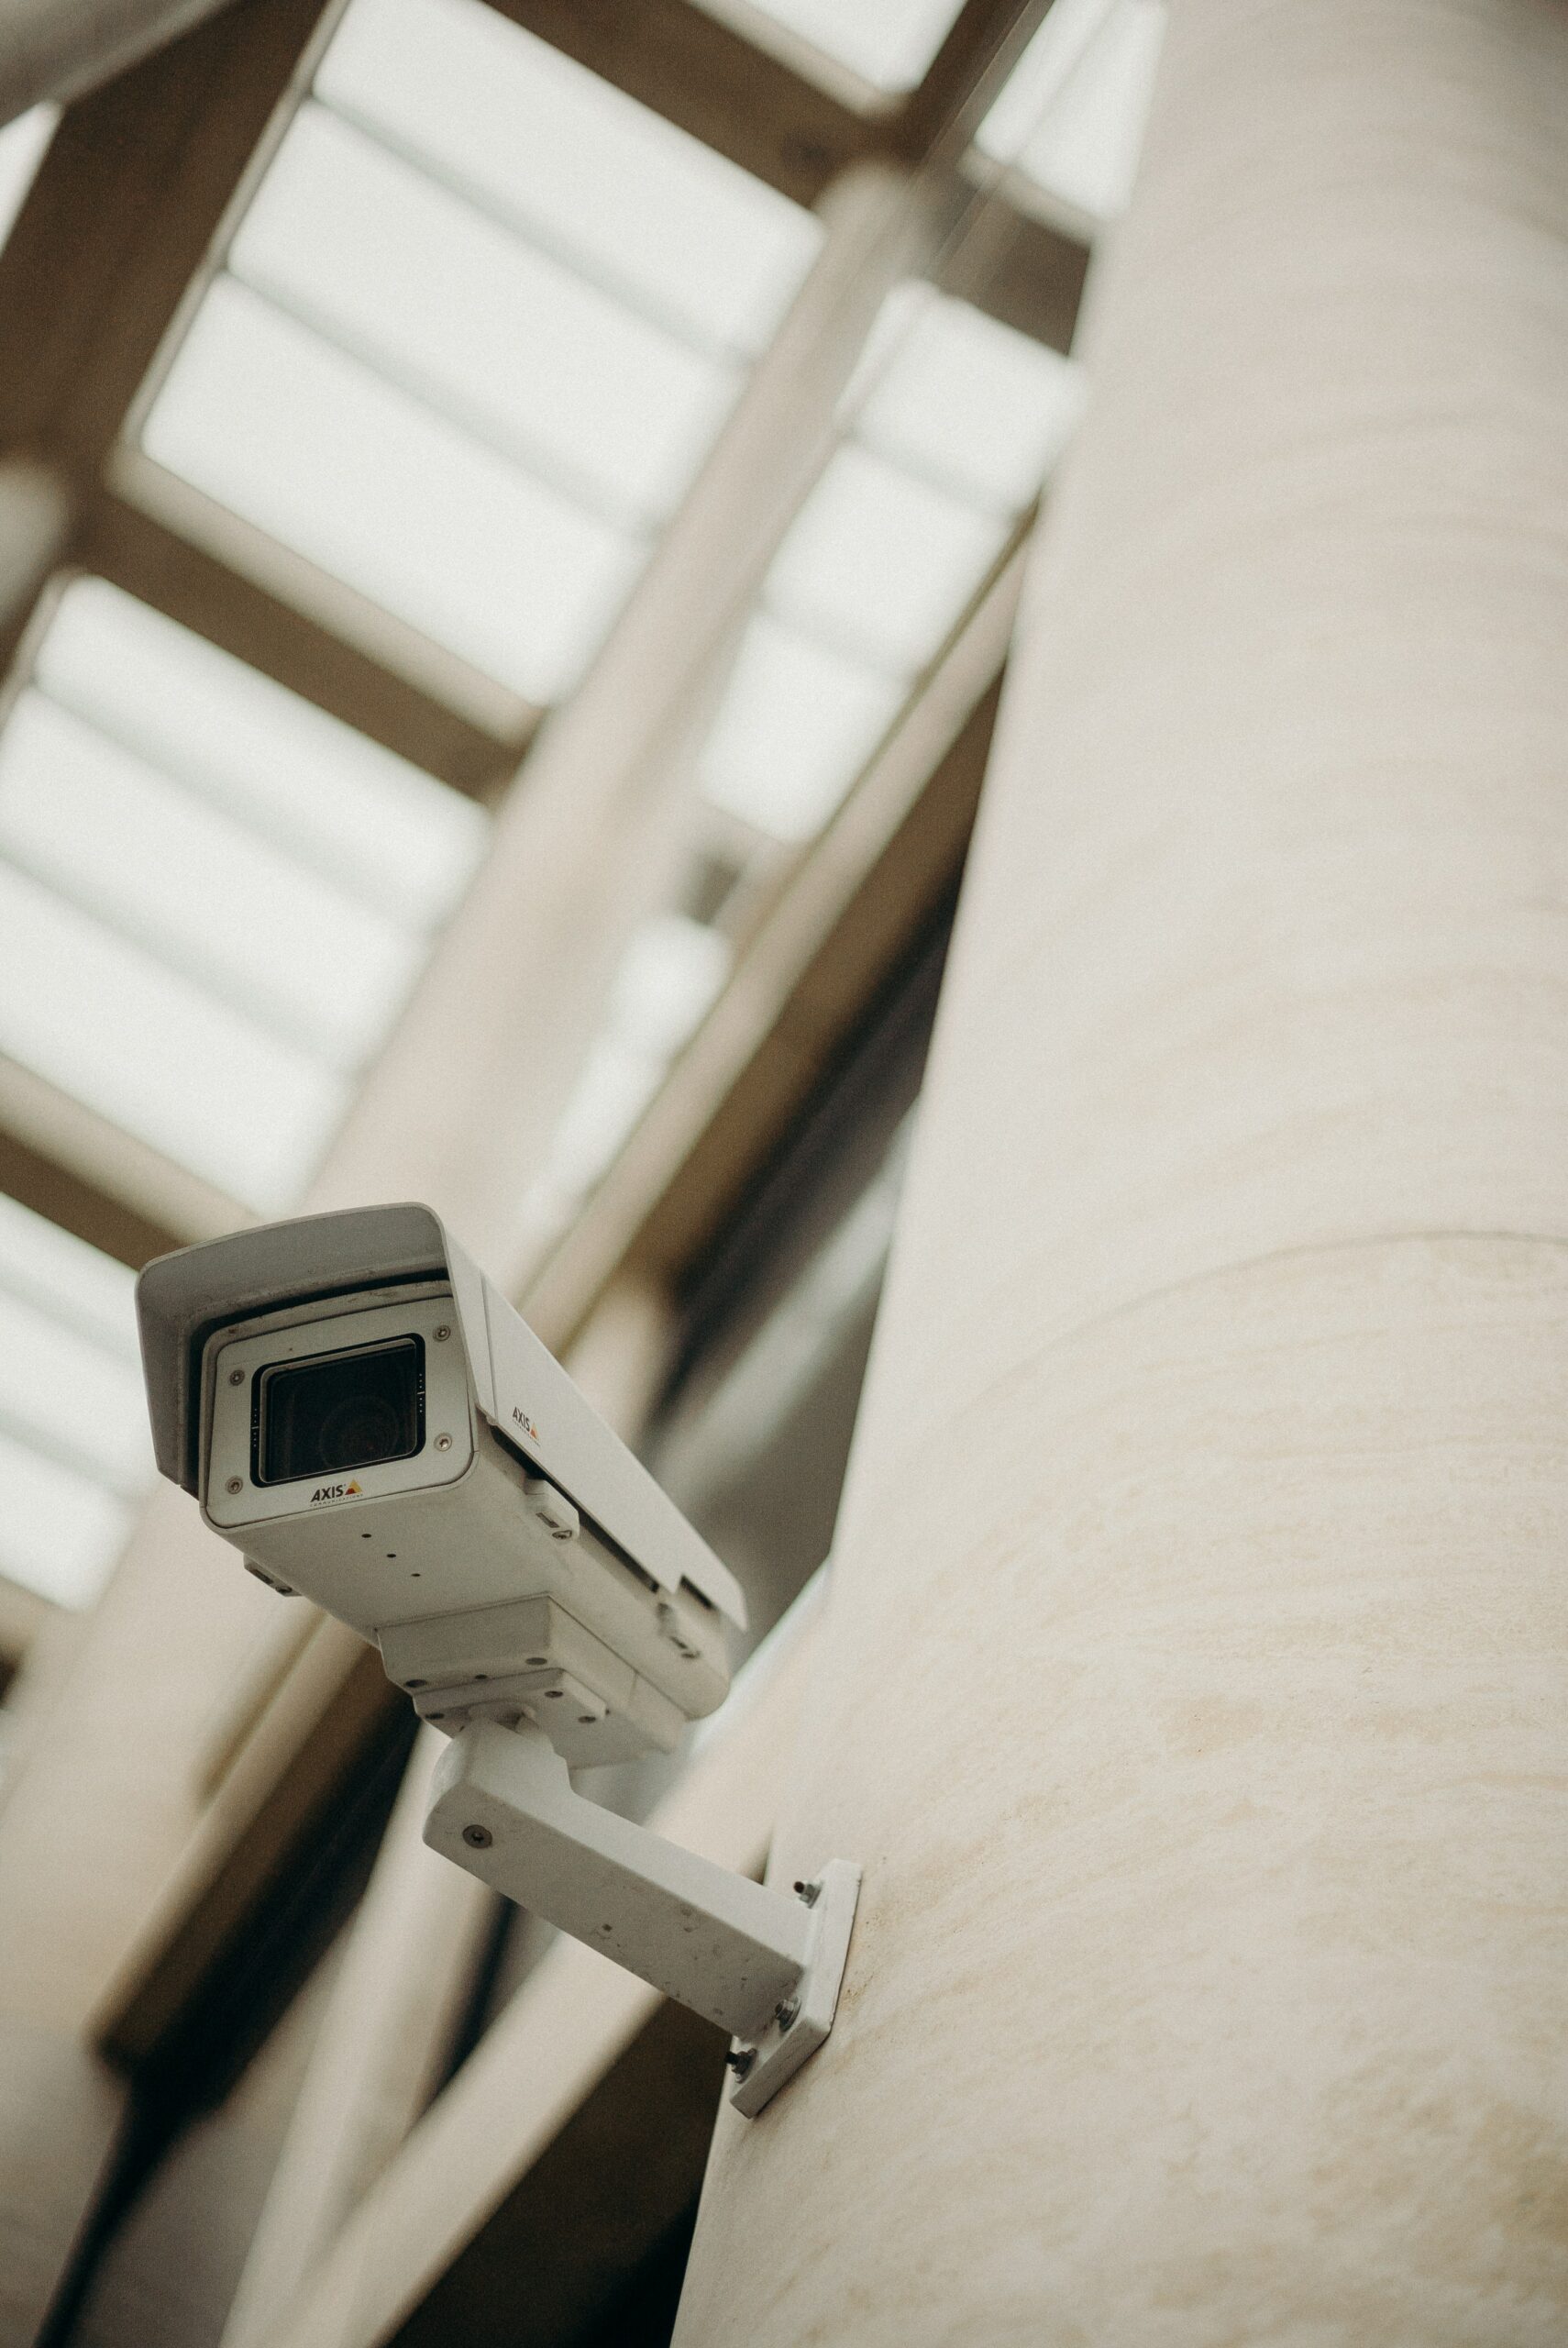 a security camera inside on a concrete wall